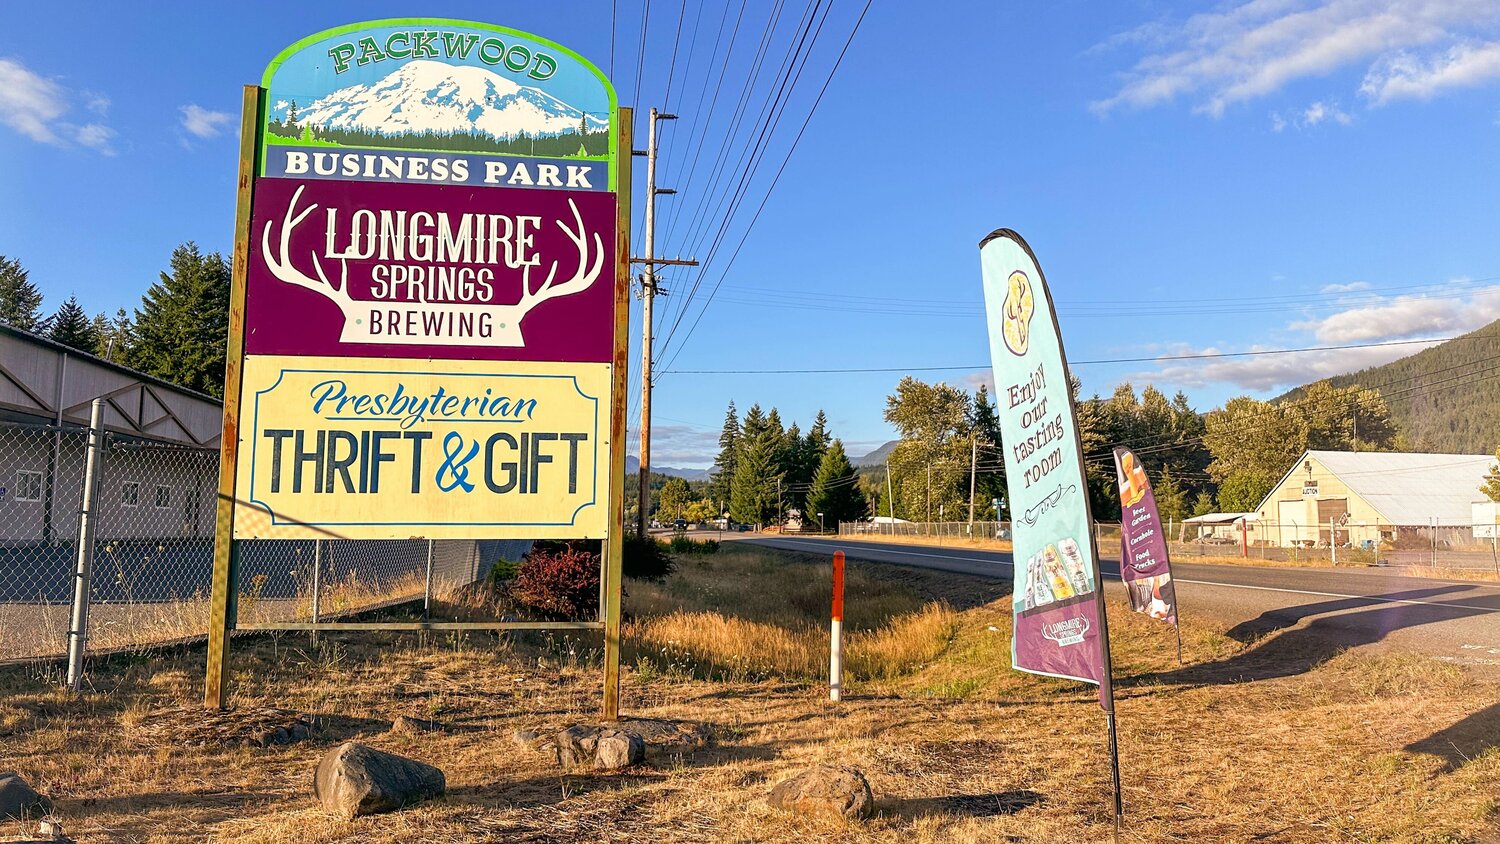 Longmire Springs Brewing is located in the Packwood Business Park along Norman Way.